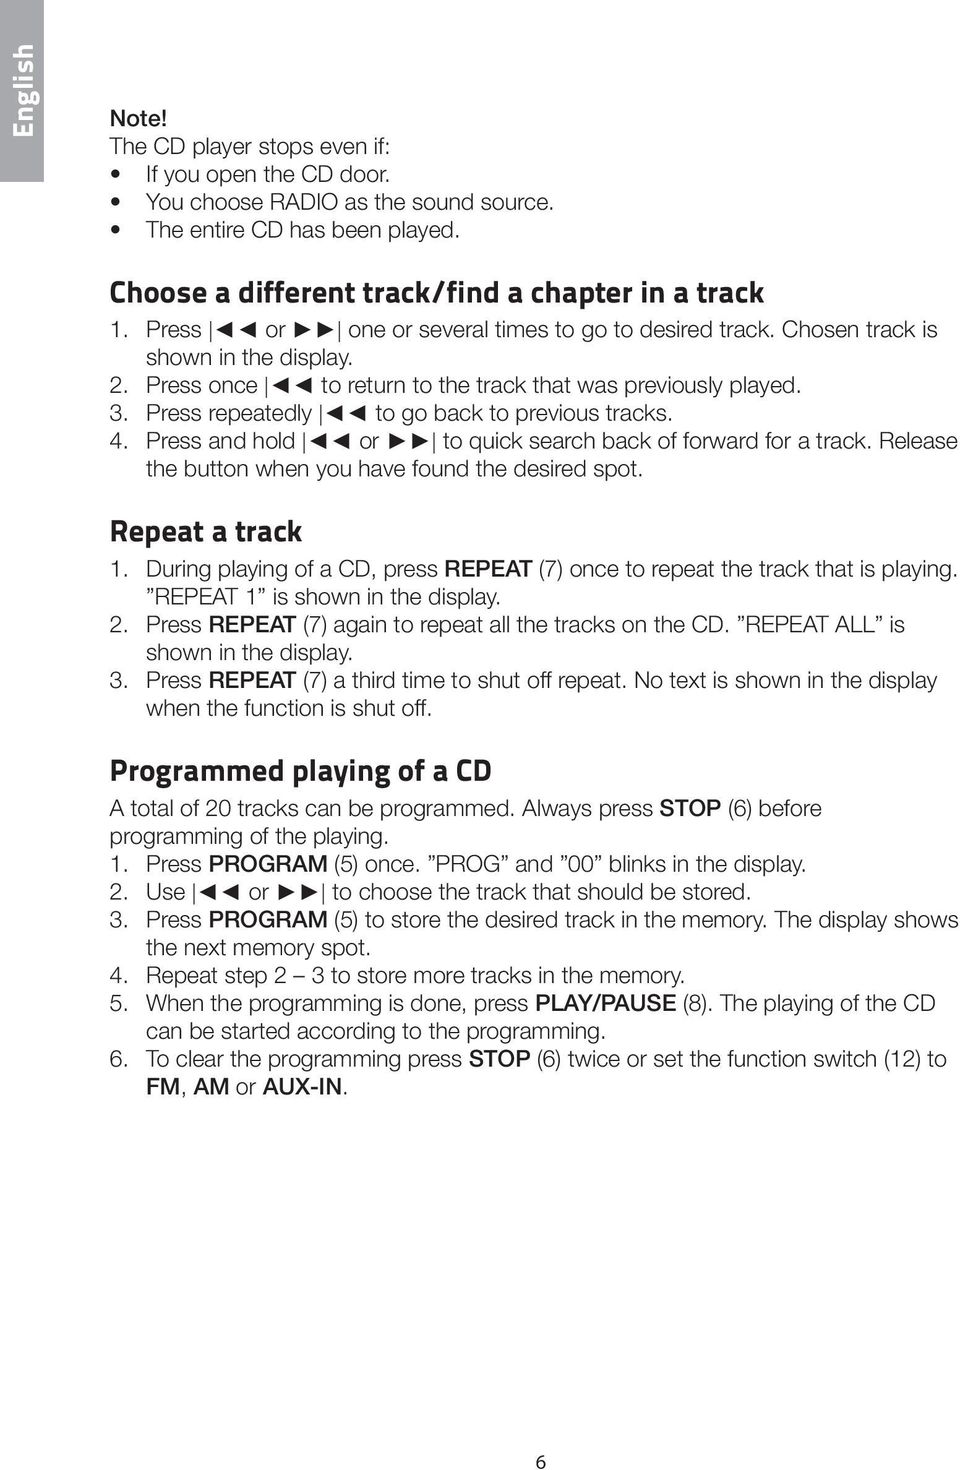 Press repeatedly to go back to previous tracks. 4. Press and hold or to quick search back of forward for a track. Release the button when you have found the desired spot. Repeat a track 1.